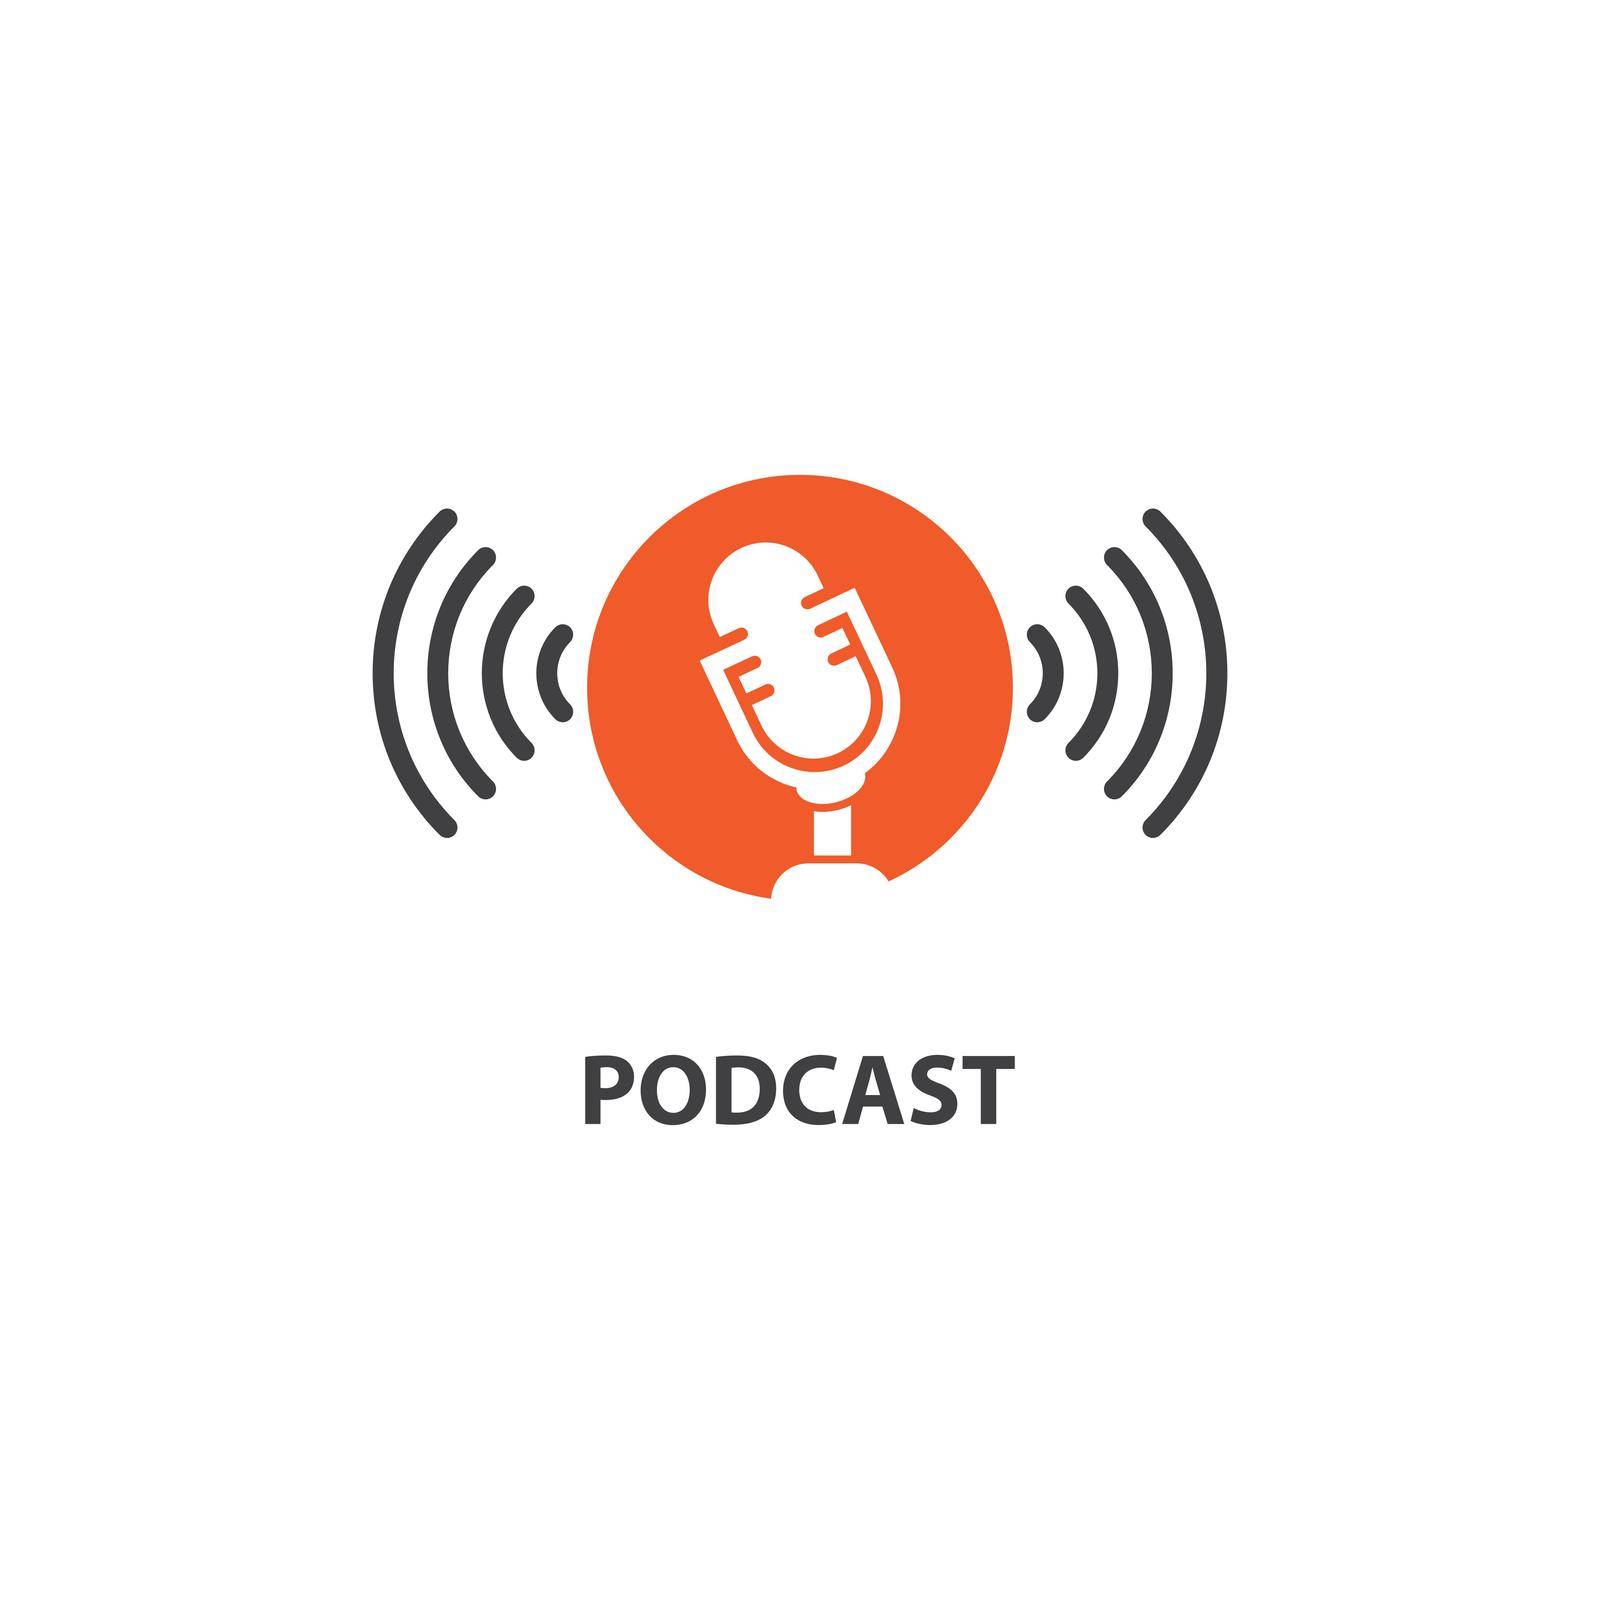 Podcast vector design by awk